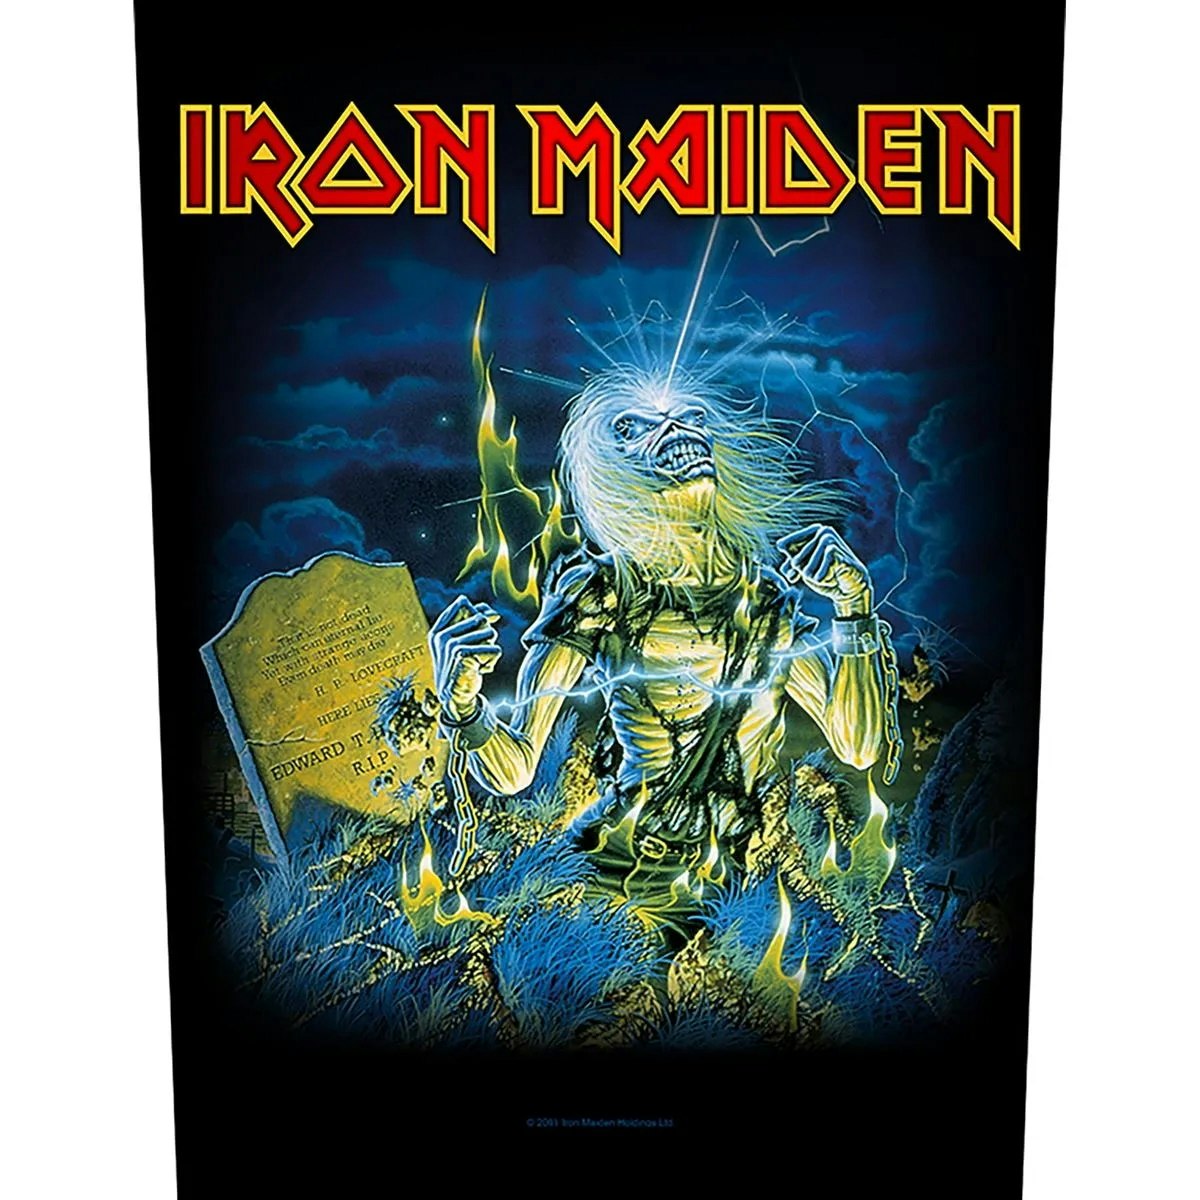 IRON MAIDEN - LIVE AFTER DEATH Backpatch